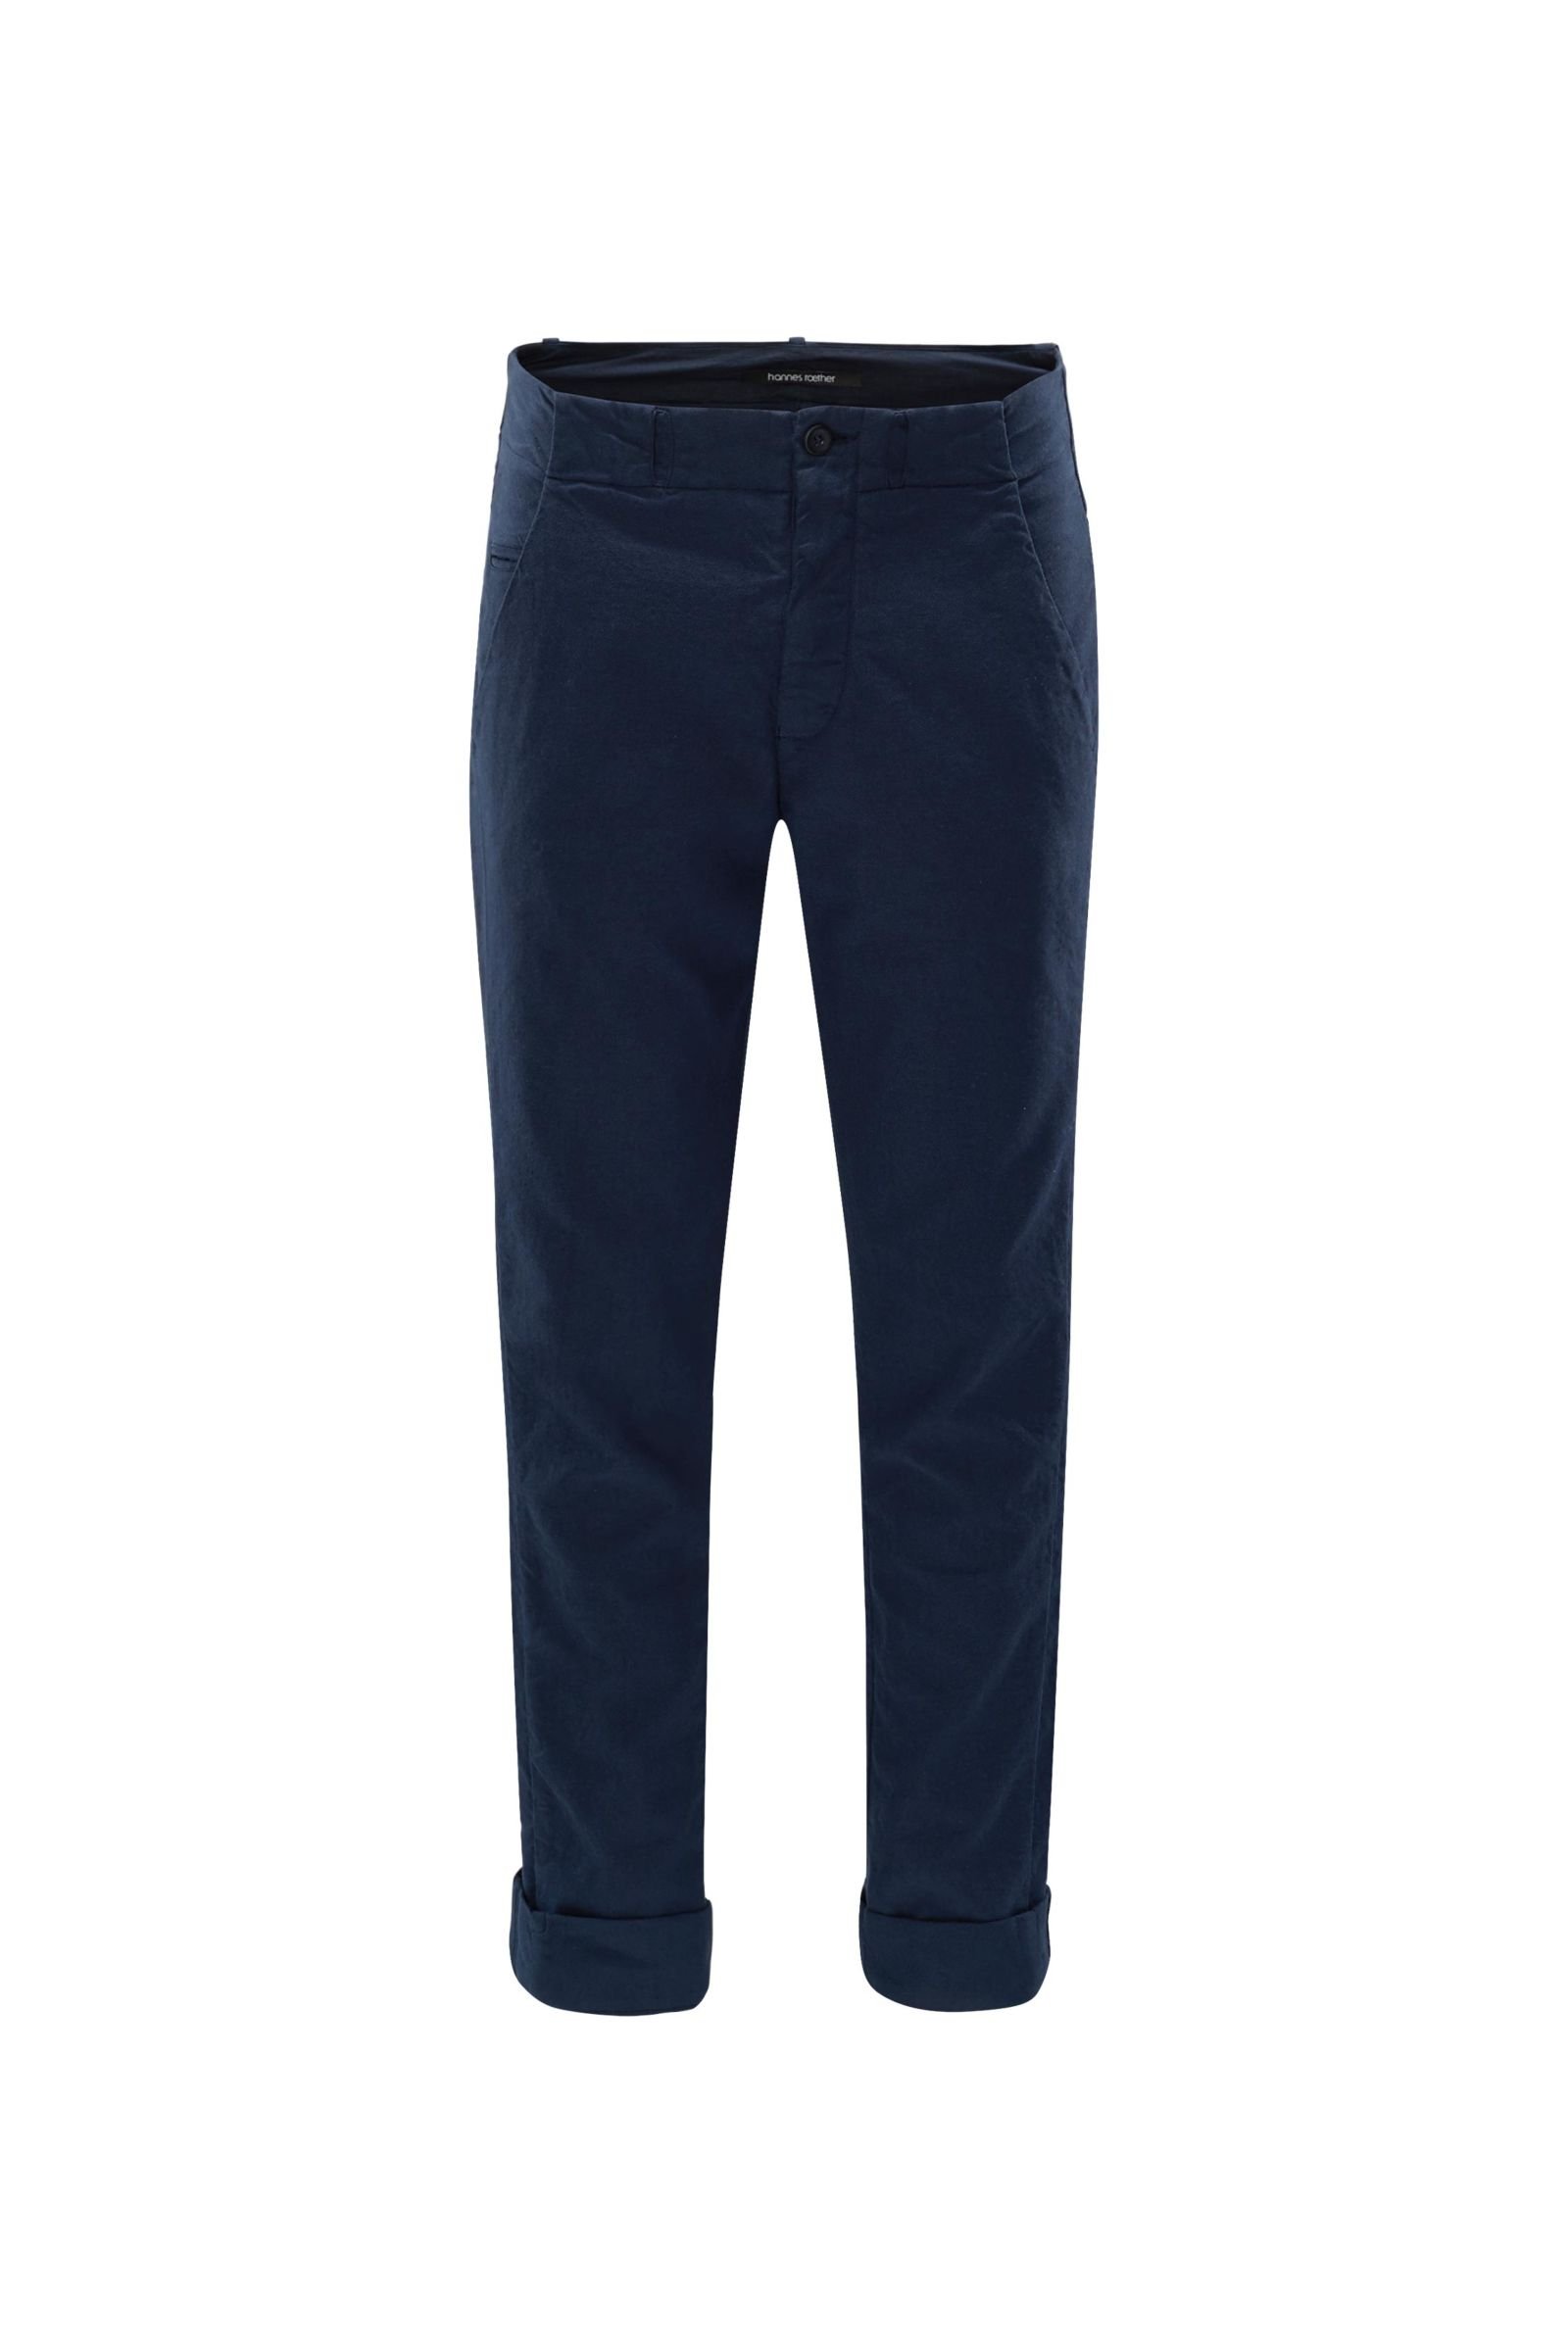 Trousers 'T21roo' navy